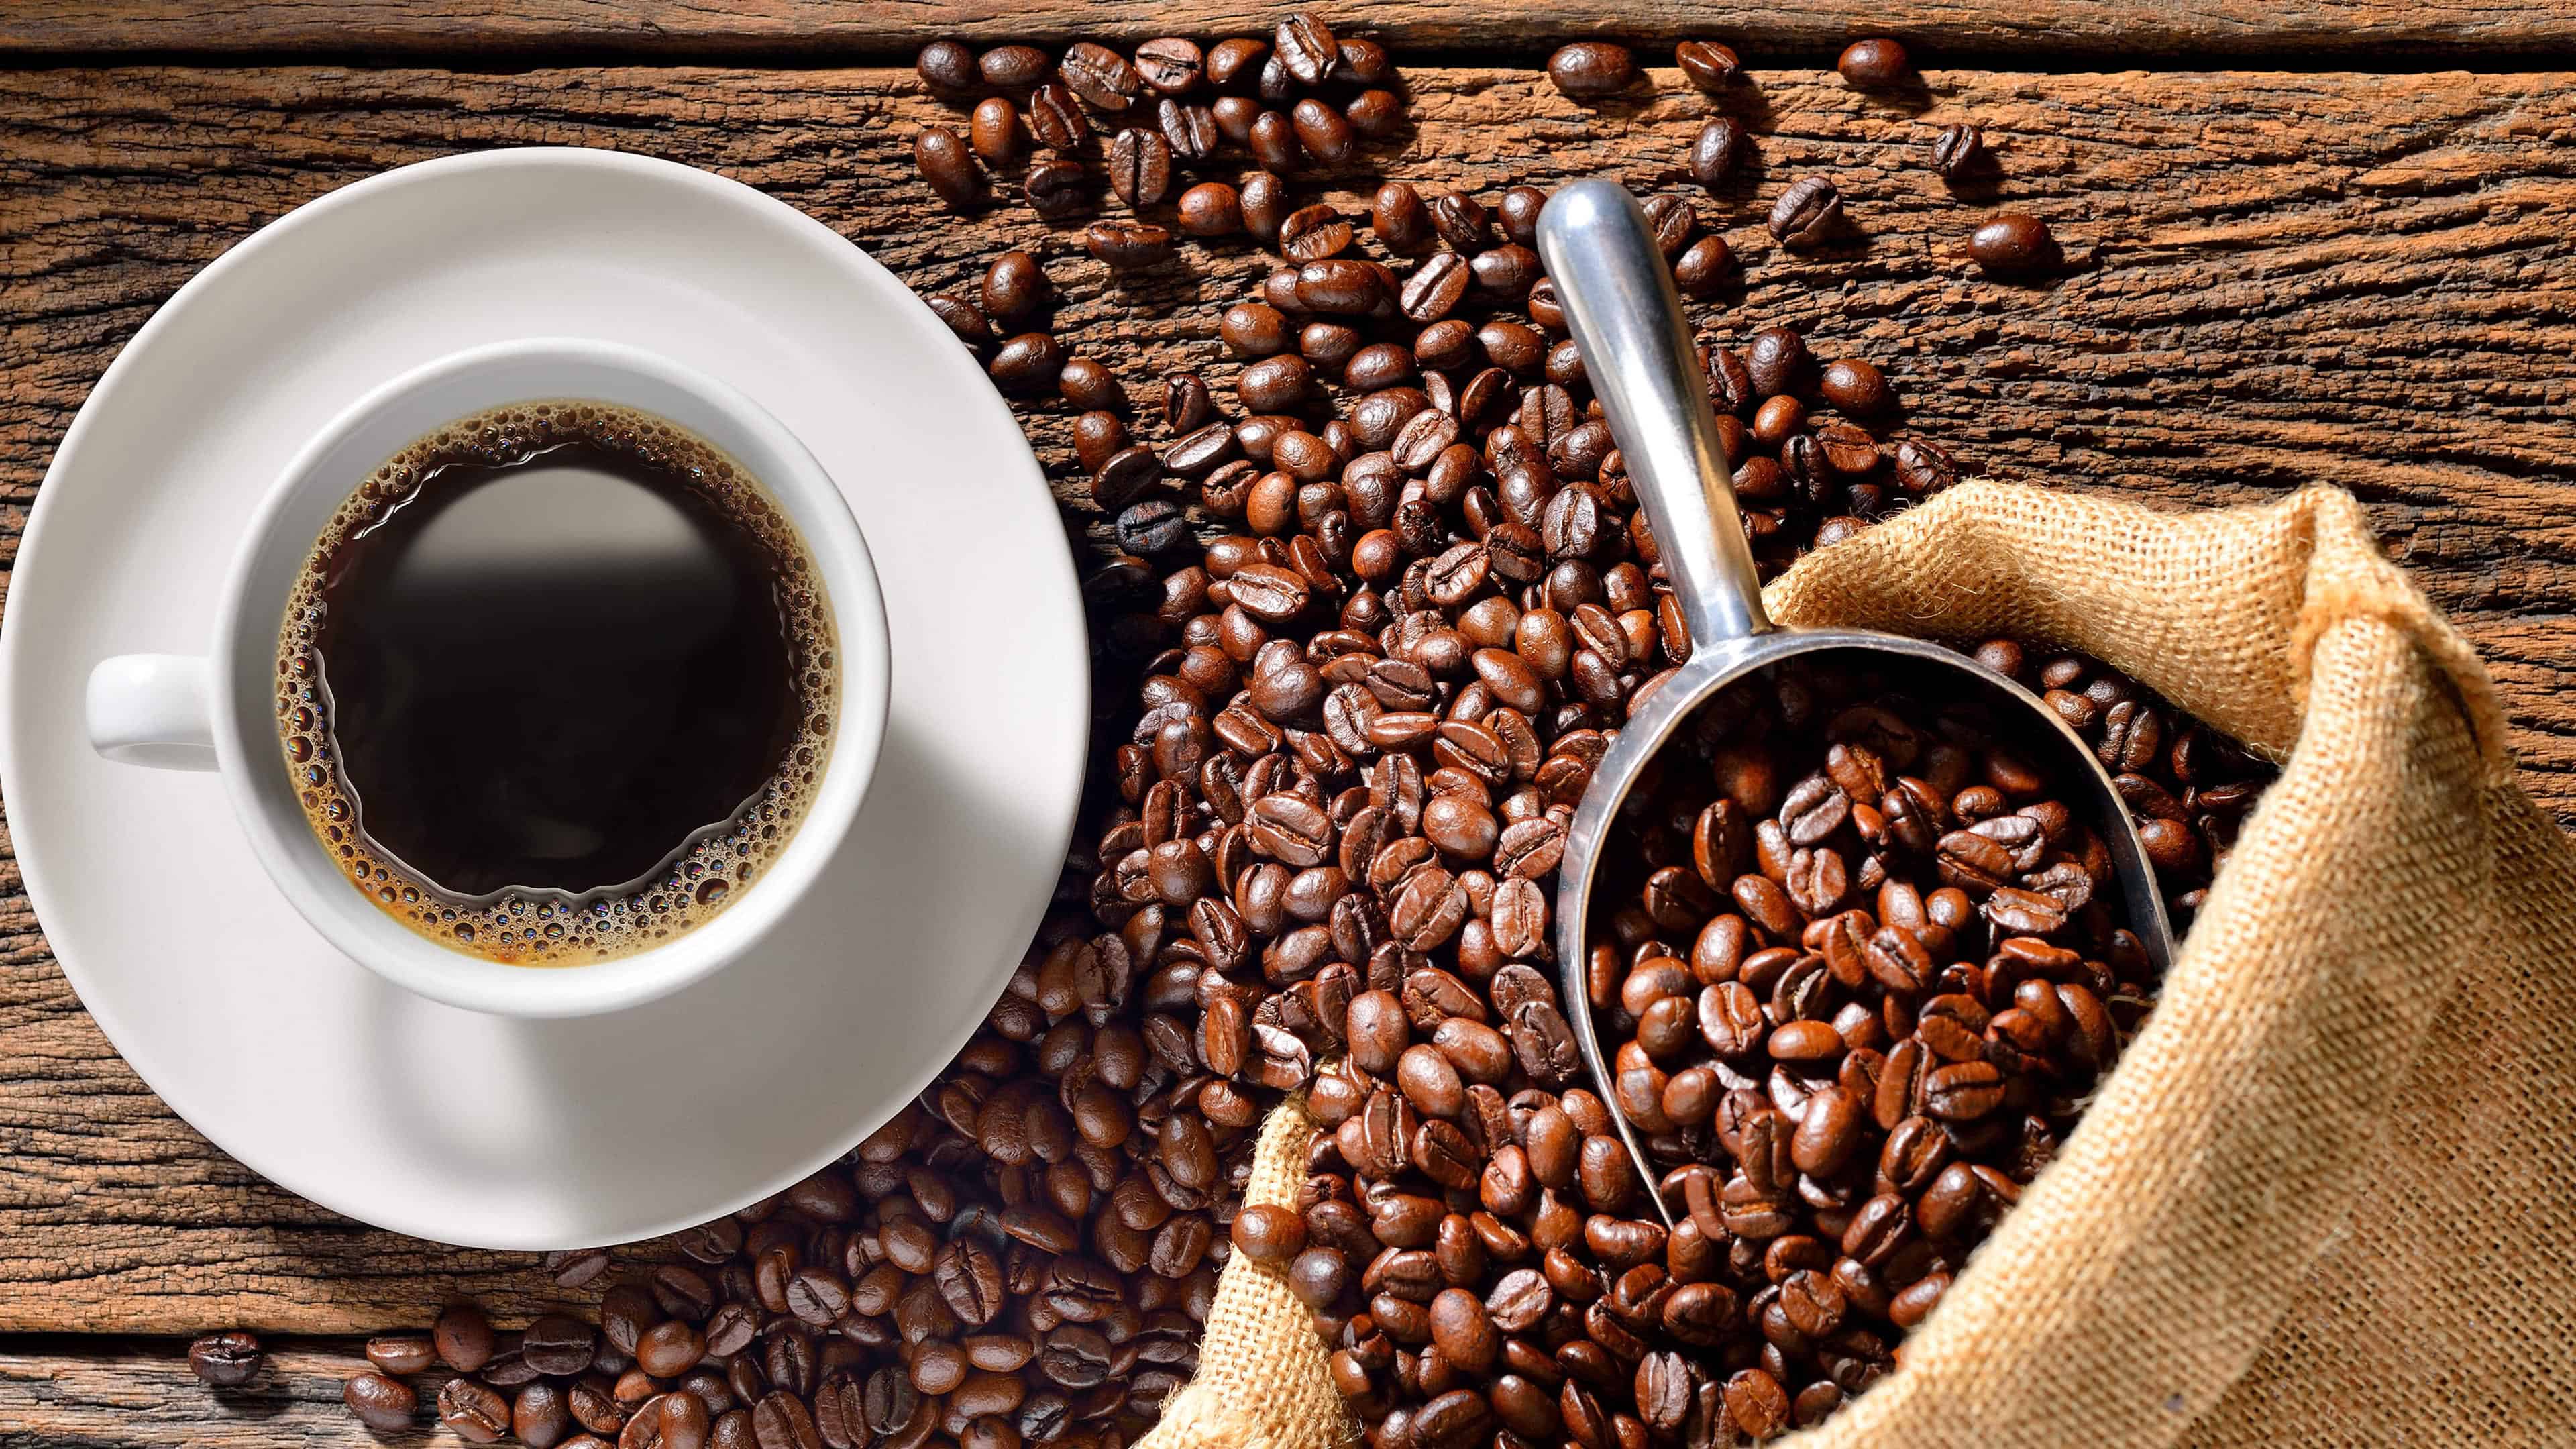 Cup Of Coffee And Roasted Beans On Wood Table Uhd 4k - Coffee Wallpaper 4k - HD Wallpaper 